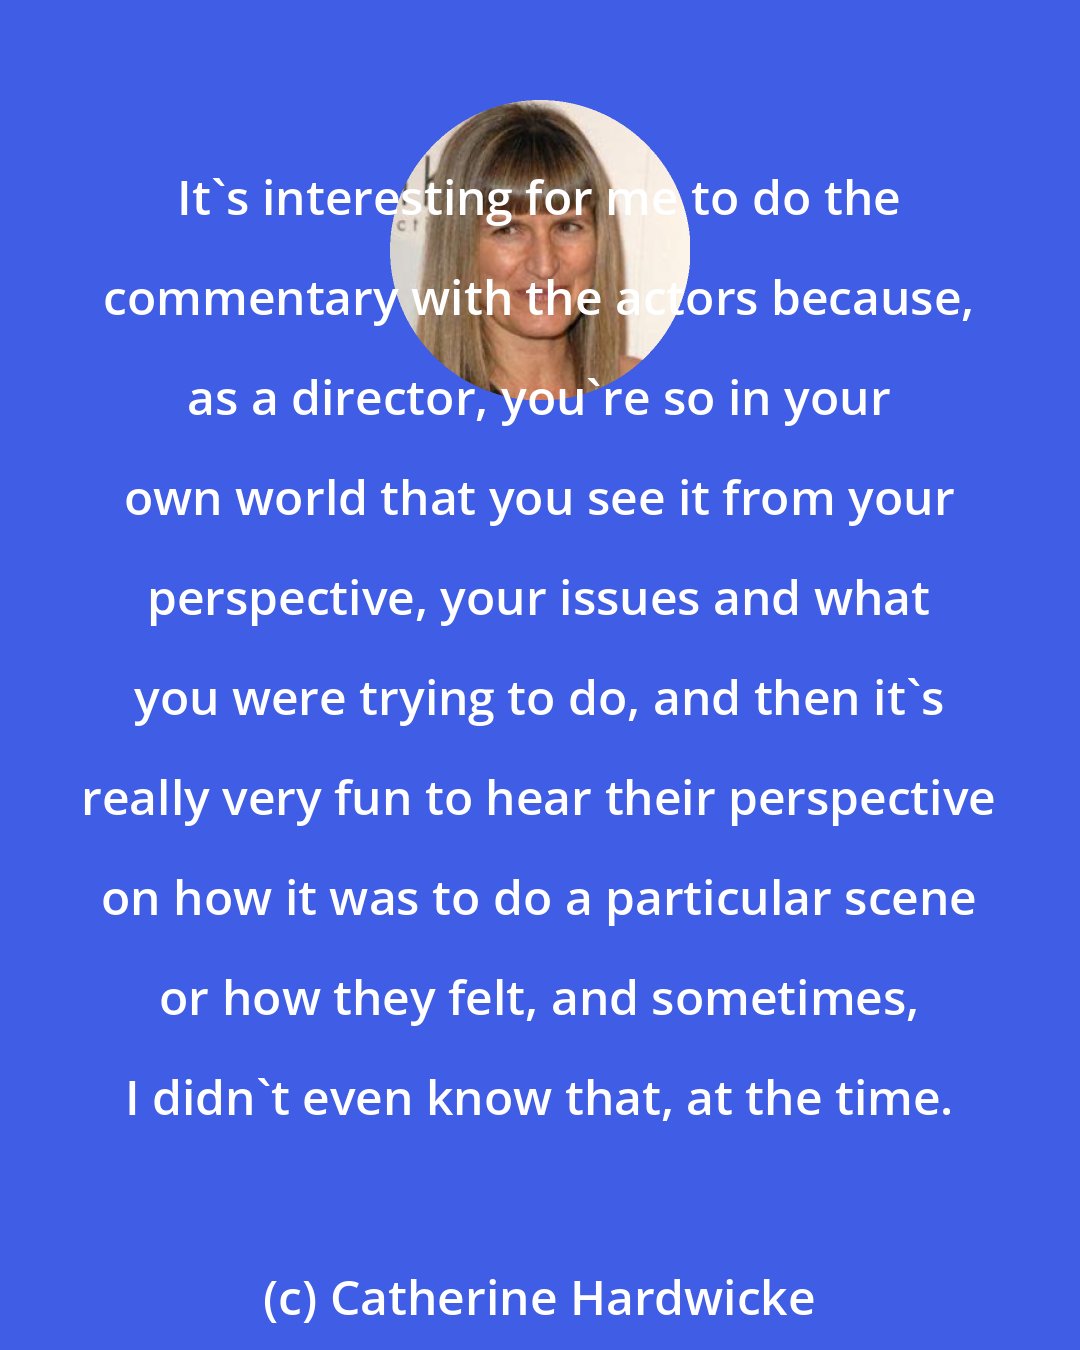 Catherine Hardwicke: It's interesting for me to do the commentary with the actors because, as a director, you're so in your own world that you see it from your perspective, your issues and what you were trying to do, and then it's really very fun to hear their perspective on how it was to do a particular scene or how they felt, and sometimes, I didn't even know that, at the time.